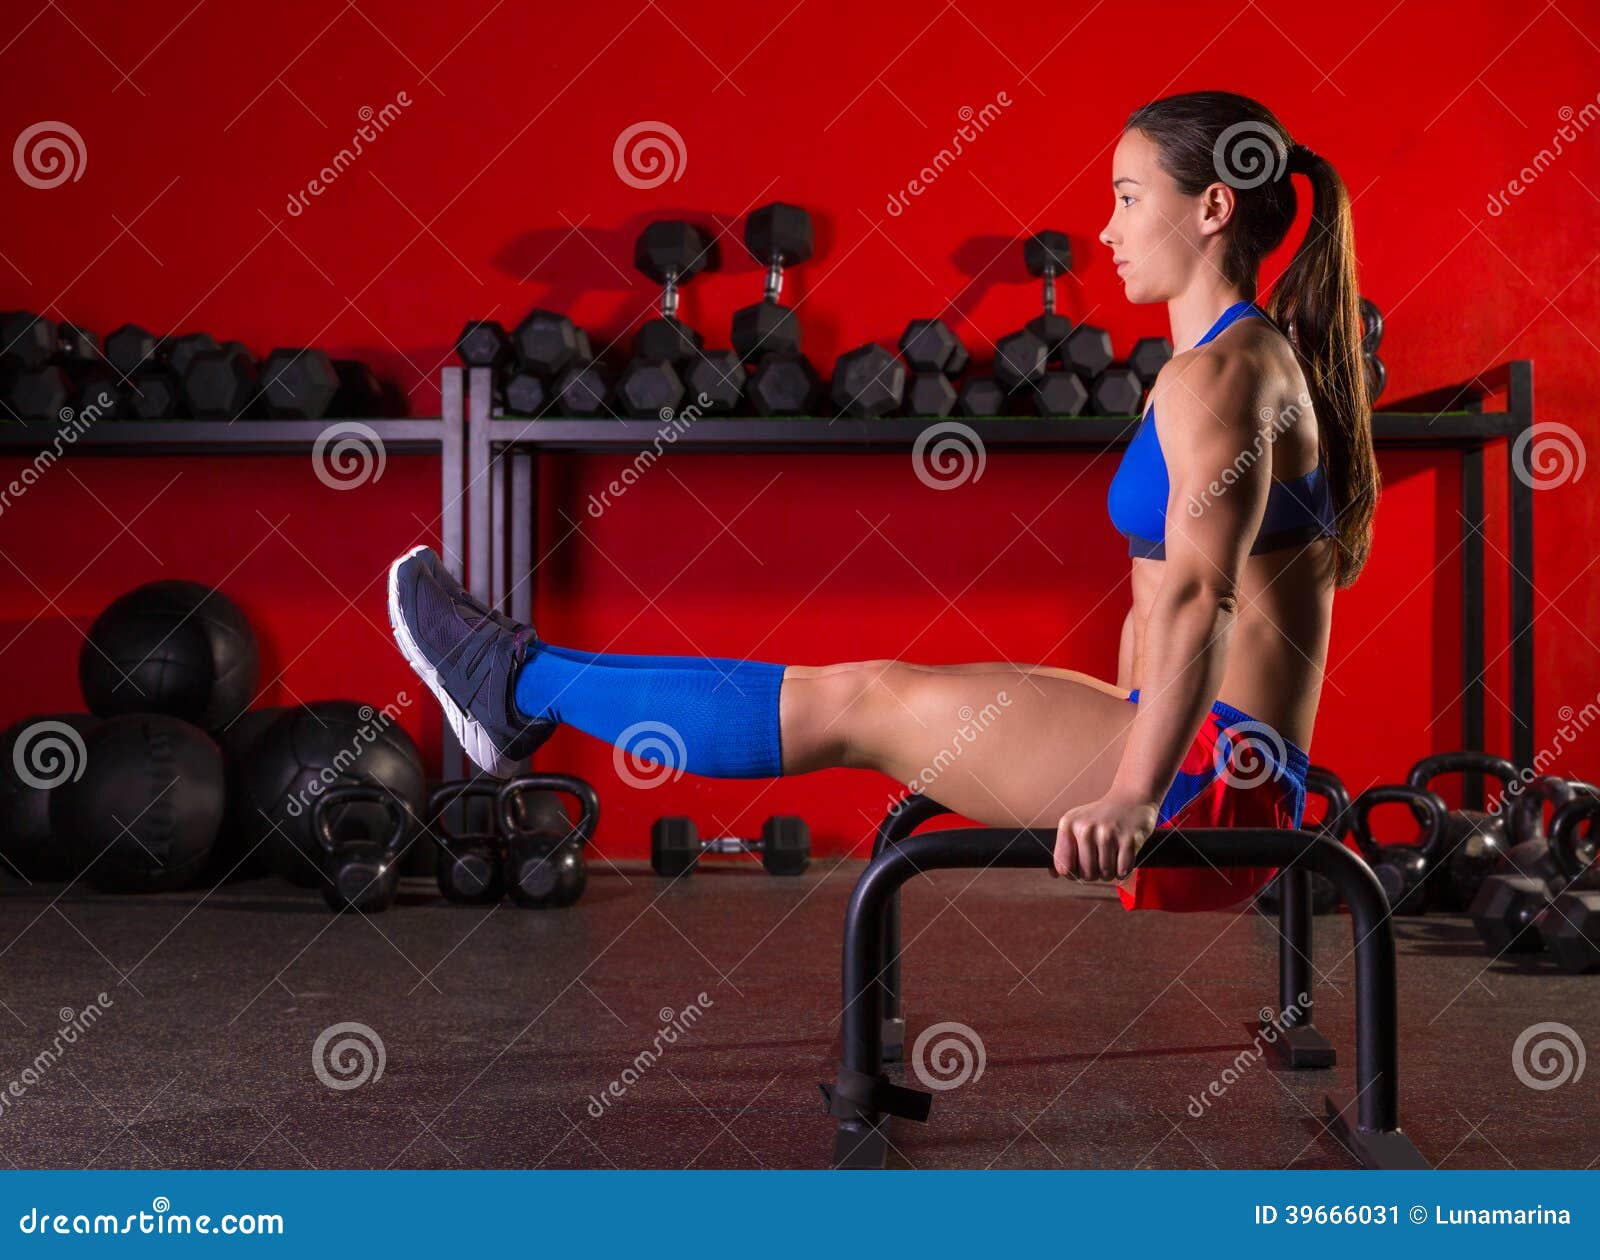 parallettes woman parallel bars workout at gym